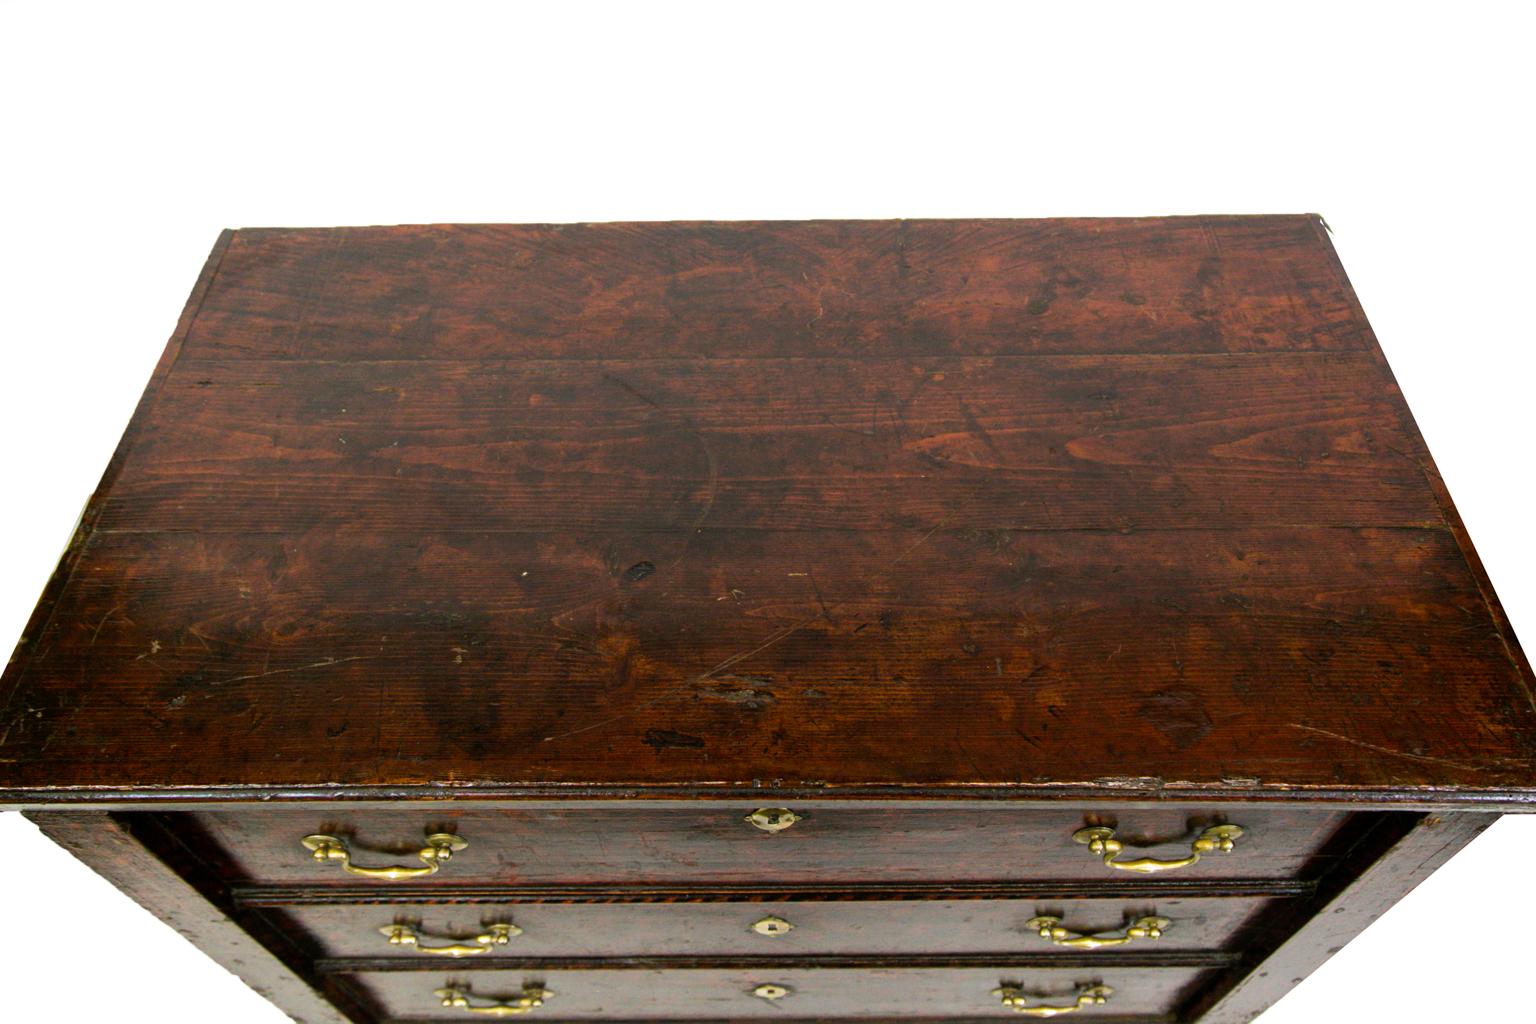 European faux painted pine lift top chest on legs. The drawer fronts, stiles, and sides are faux painted to simulate burled wood. The top two drawers are dummies but the bottom is a working one.